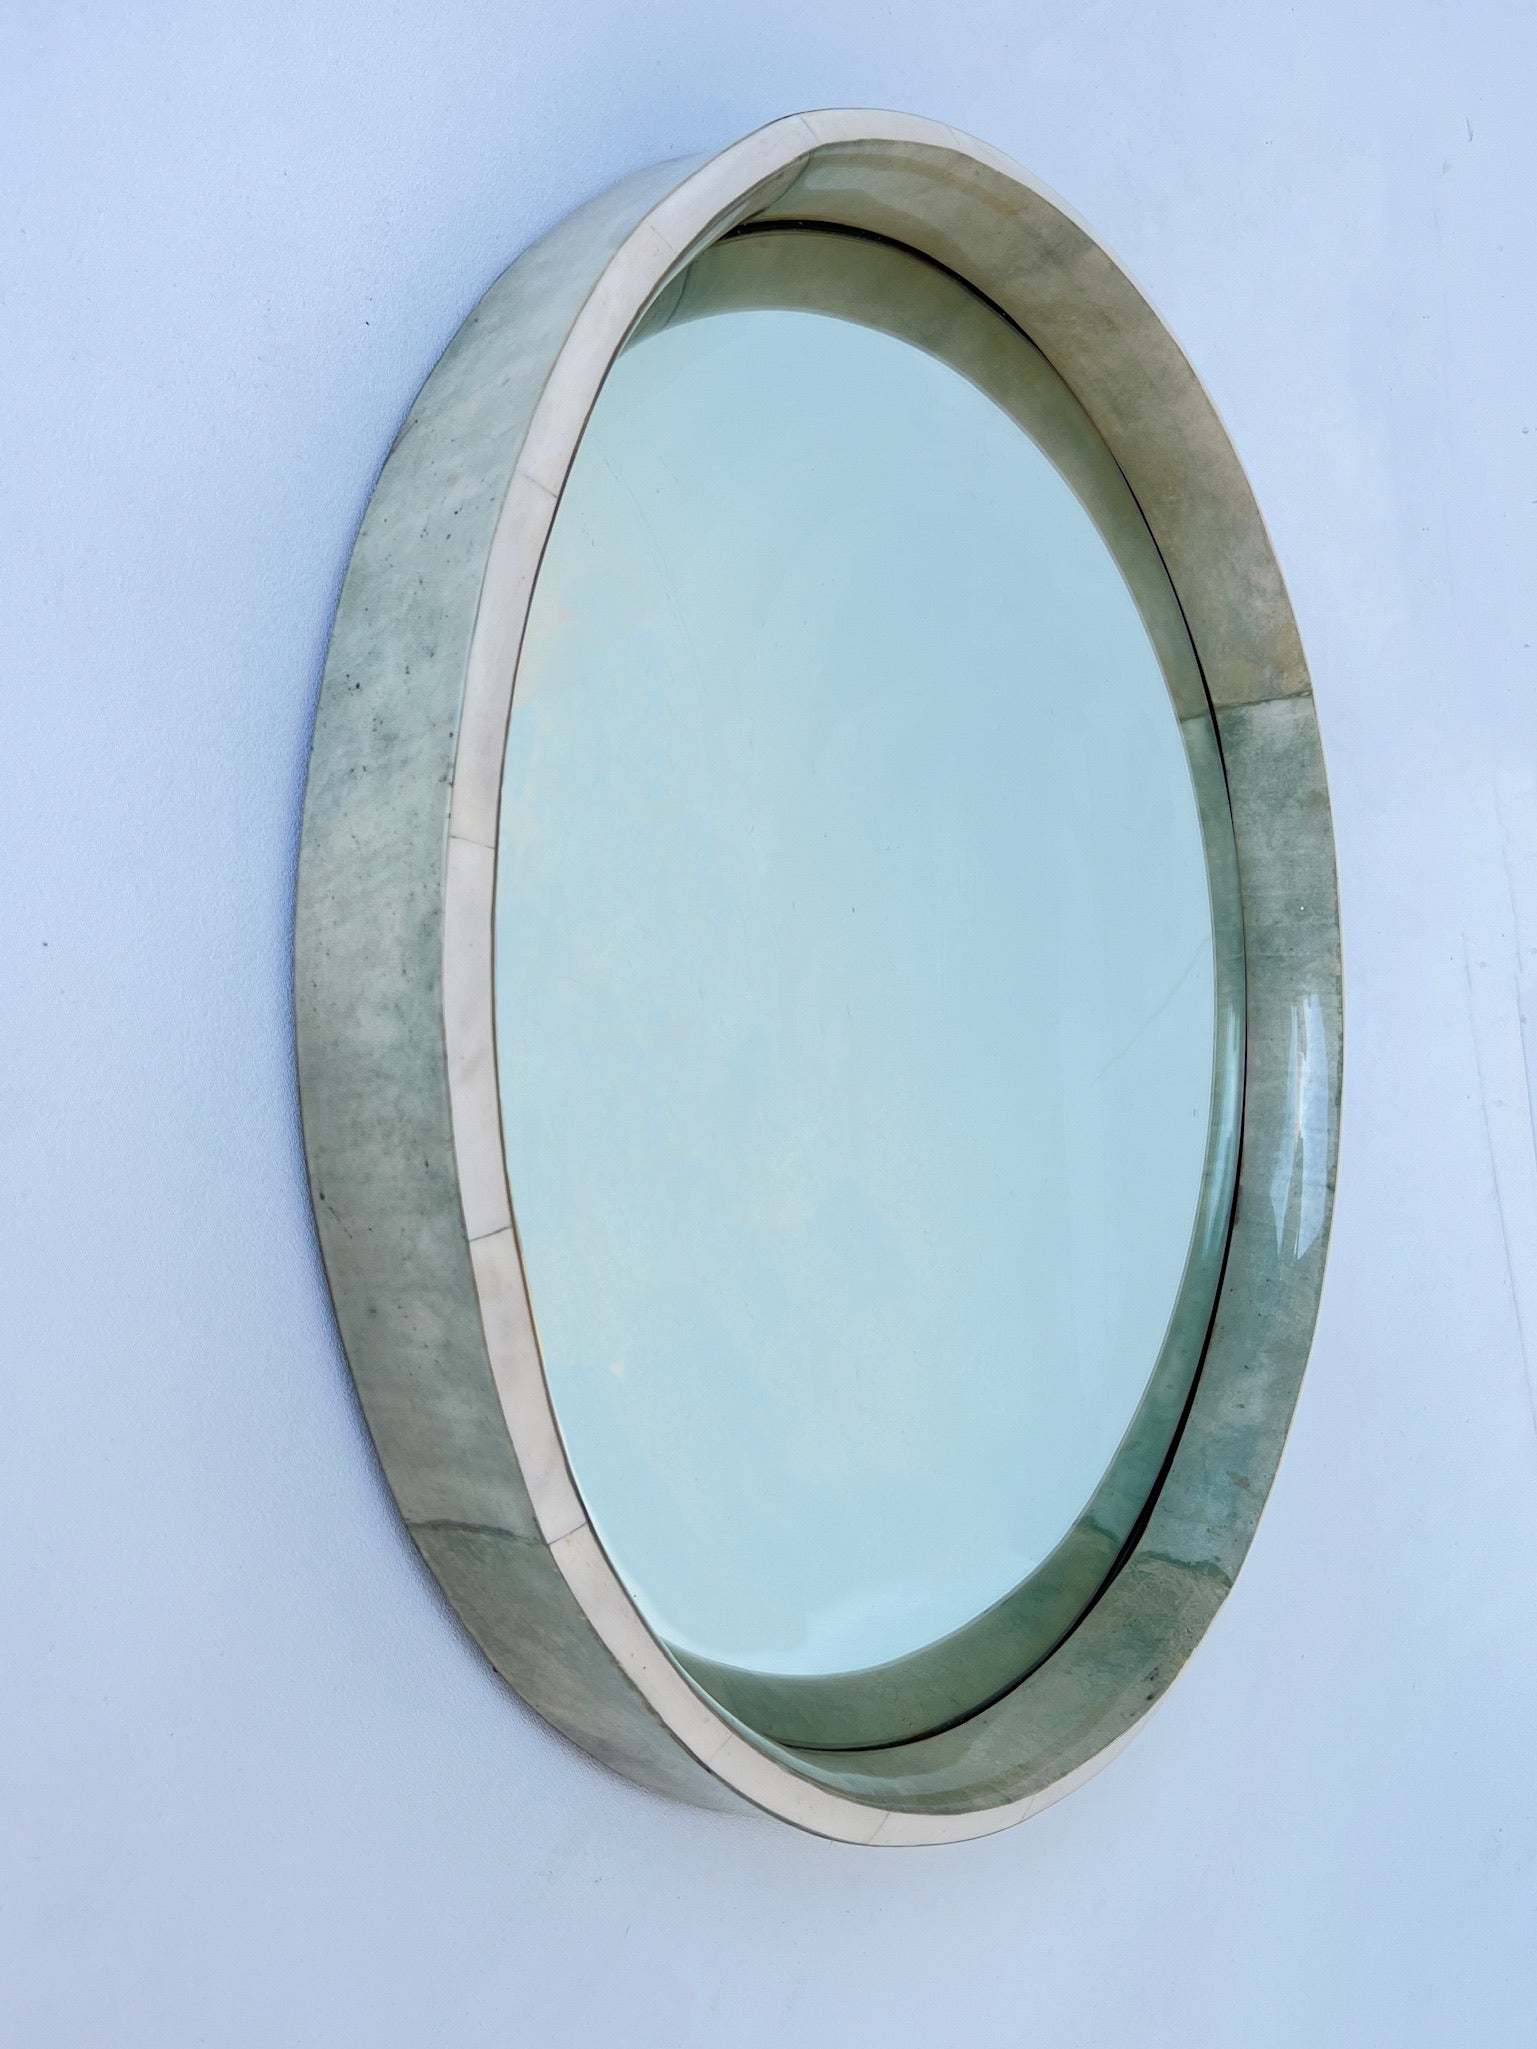 Glamorous 1980’s Italian lite green stain goatskin parchment paper and white bone lacquered frame convex mirror by Aldo Tura.
In beautiful vintage condition.
Measurements: 26.5” Diameter 2.75” Deep. 